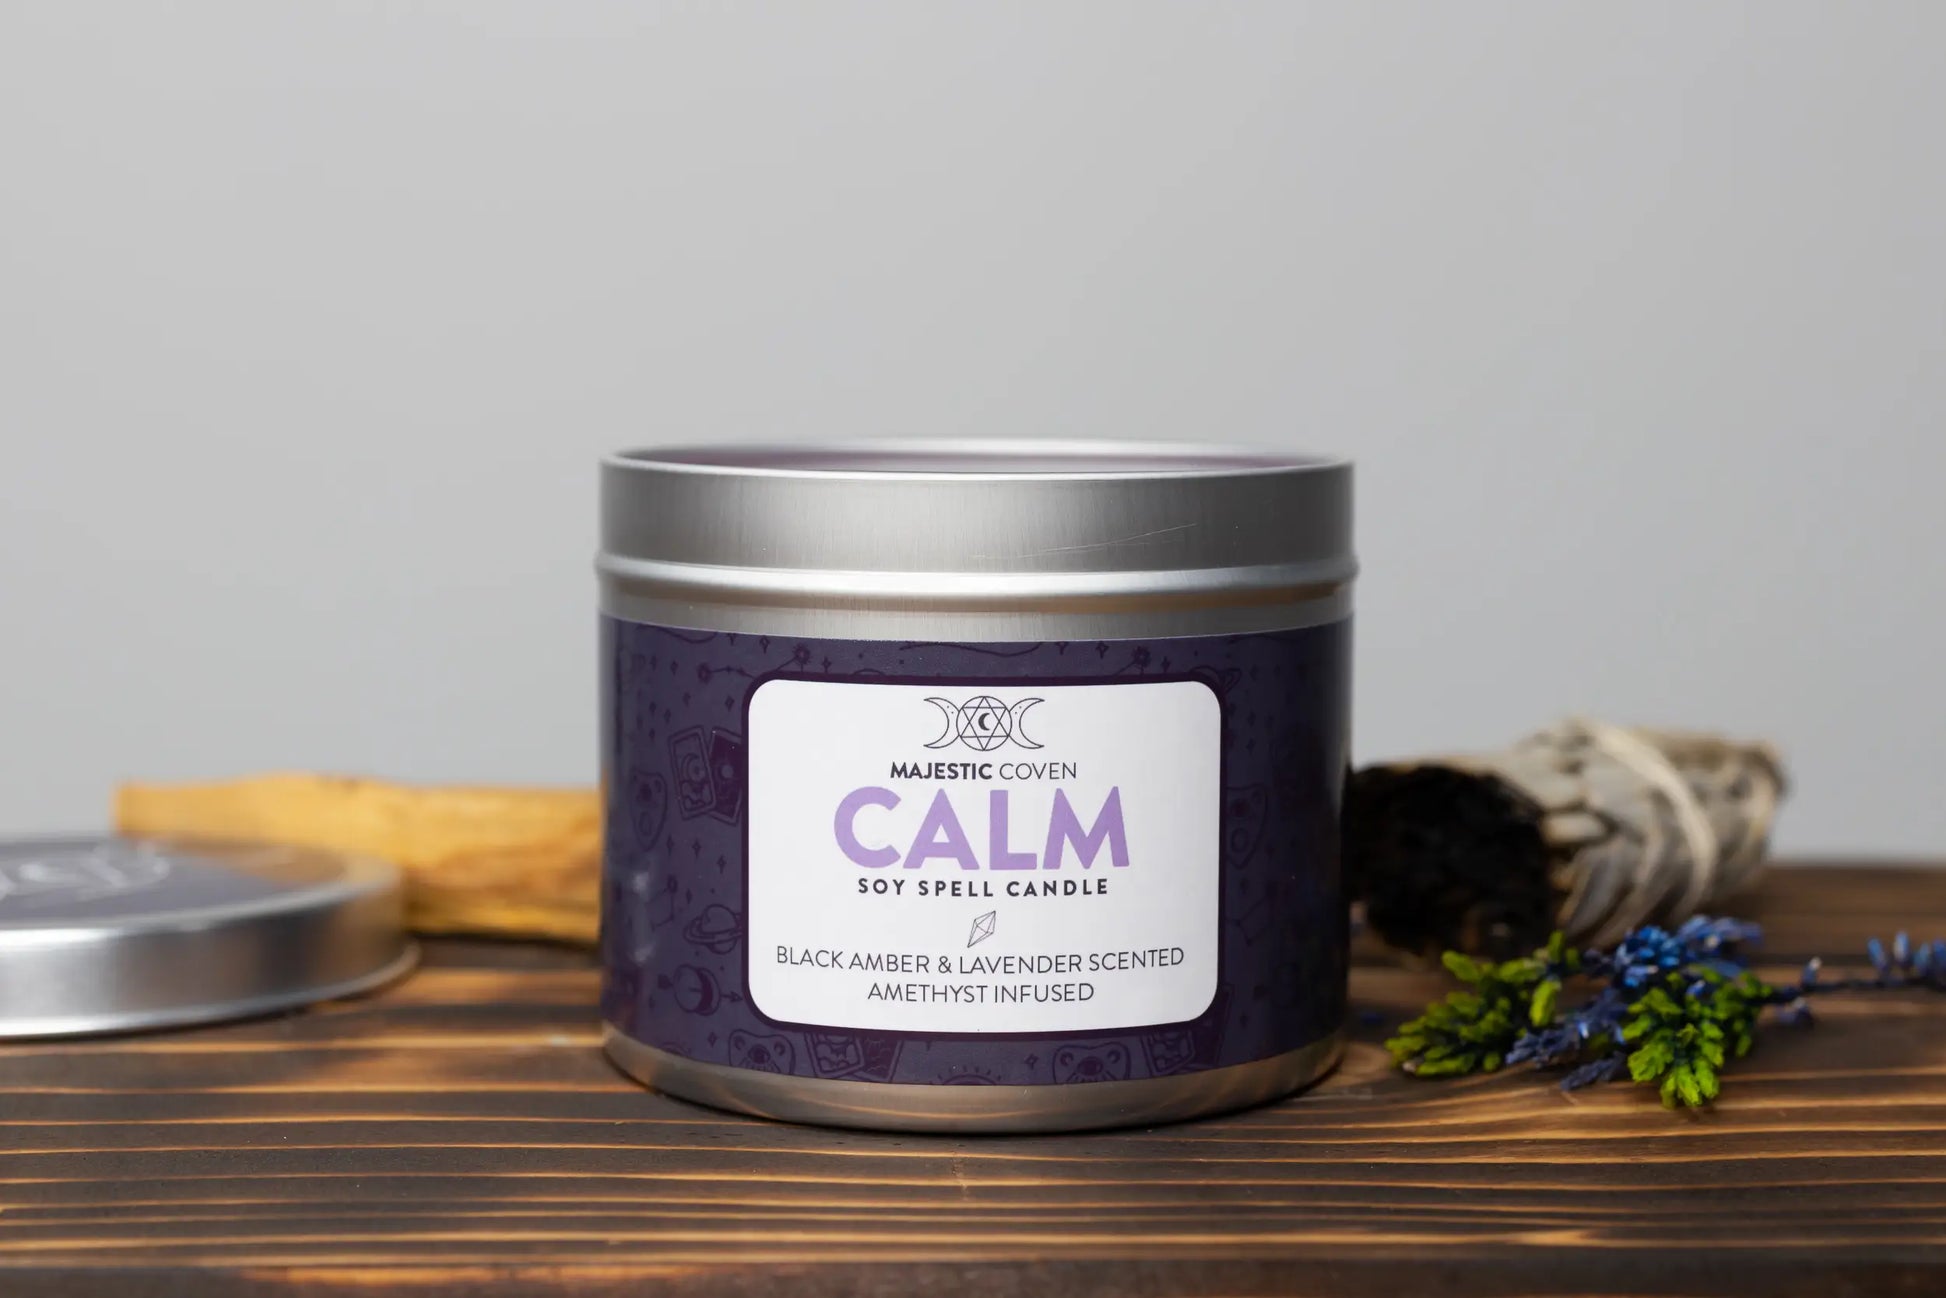 Calm - Amethyst Infused Crystal Soy Candle - Spellbound